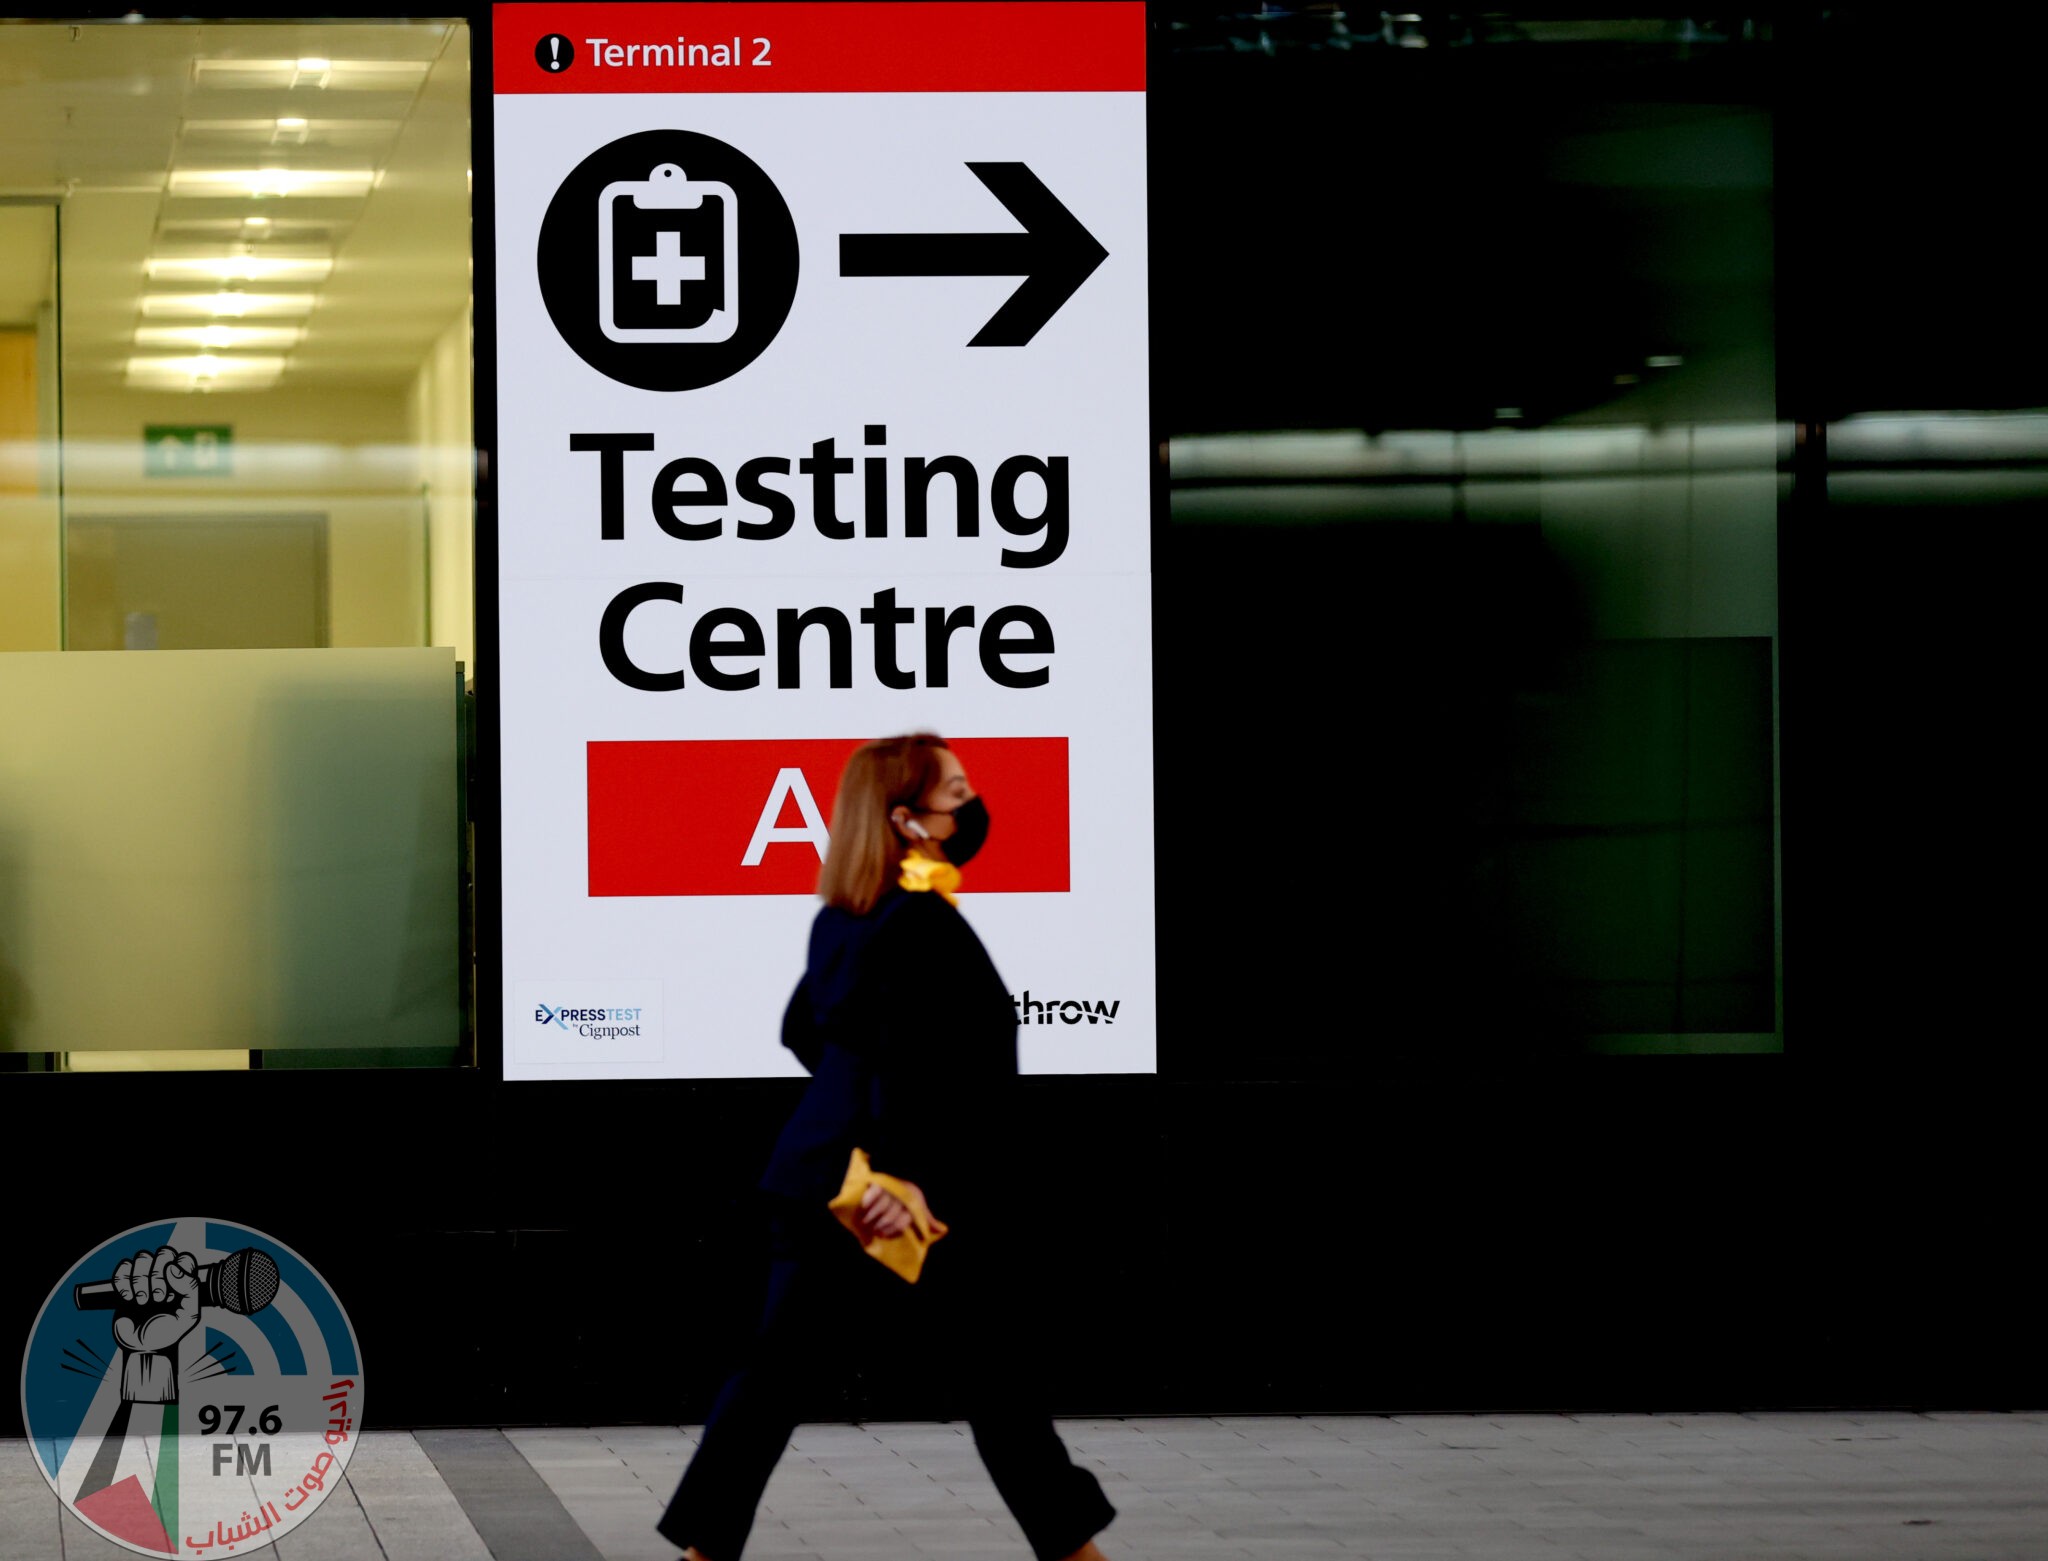 (211201) -- LONDON, Dec. 1, 2021 (Xinhua) -- A passenger walks past a placard indicating the testing center in Heathrow Airport in London, Britain, Nov. 30, 2021. British Prime Minister Boris Johnson said Saturday all travellers entering Britain must take a PCR test by the end of the second day after their arrival, and must self-isolate until they receive a negative test result. Passengers arriving in Britain from countries in Britain's travel "red list", including South Africa, from 0400 GMT on Nov. 28 will be required to book and pay for a government-approved hotel to quarantine for 10 days. Omicron, a new COVID-19 variant, has been detected in a growing number of countries and regions worldwide, prompting governments to tighten their restrictions and impose new travel bans. (Xinhua/Li Ying)